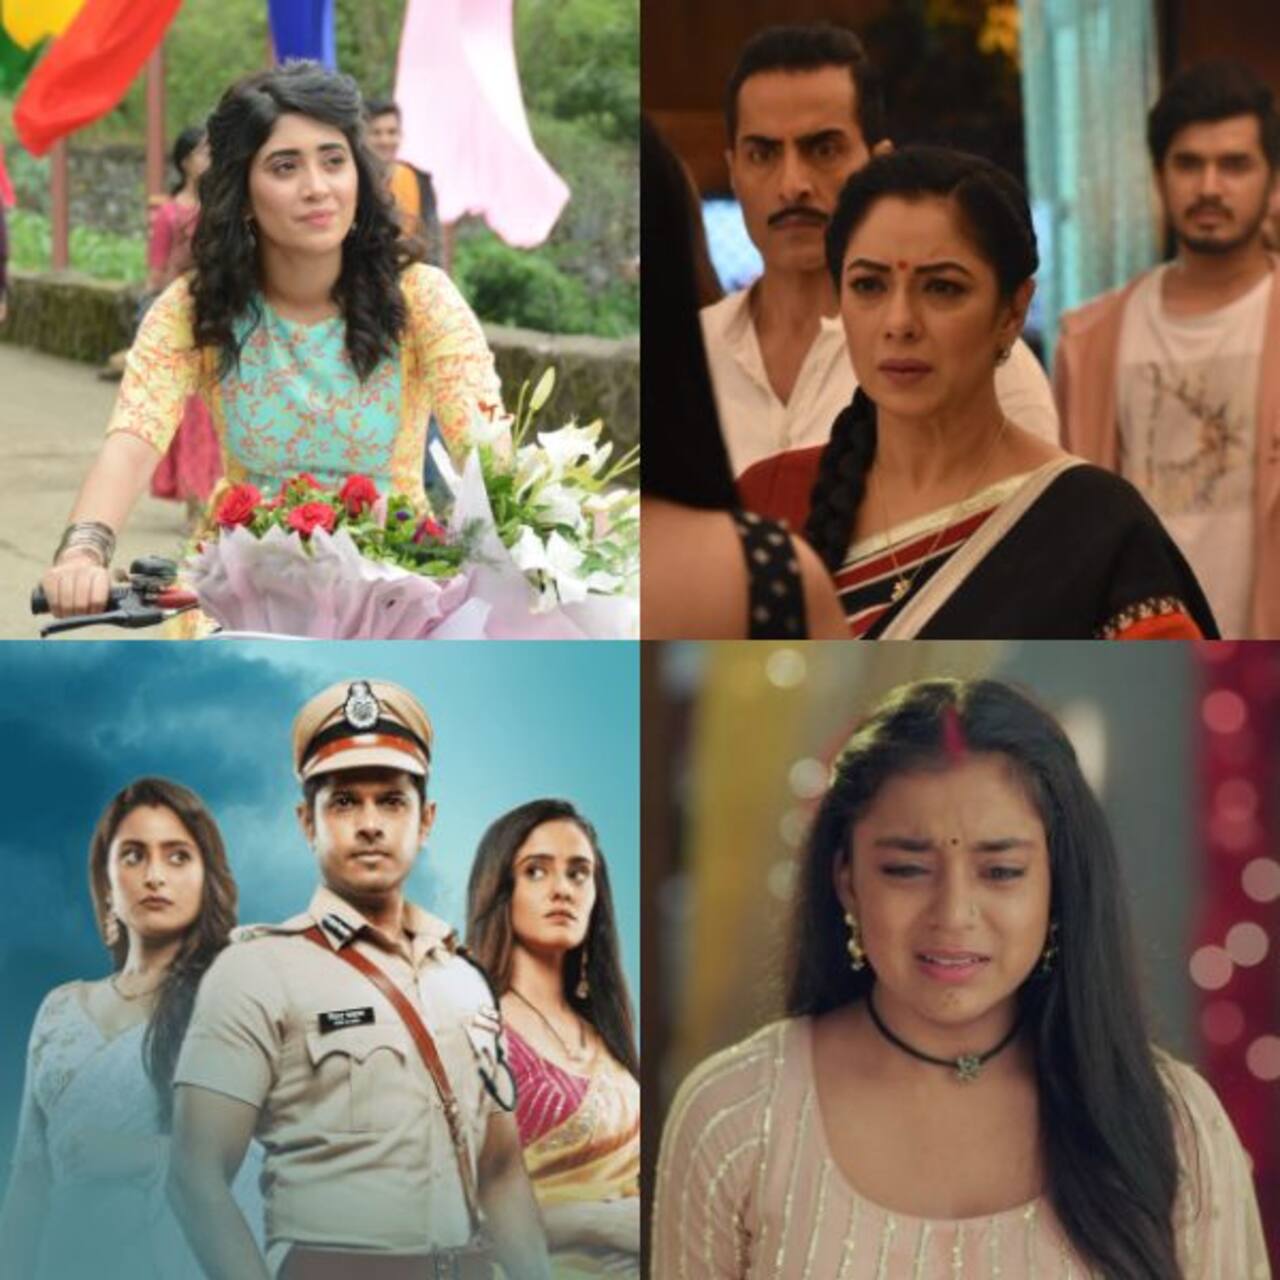 Yeh Rishta Kya Kehlata Hai, Anupamaa, Imlie and more – check out the MAJOR TWISTS in store for the top TV shows this week